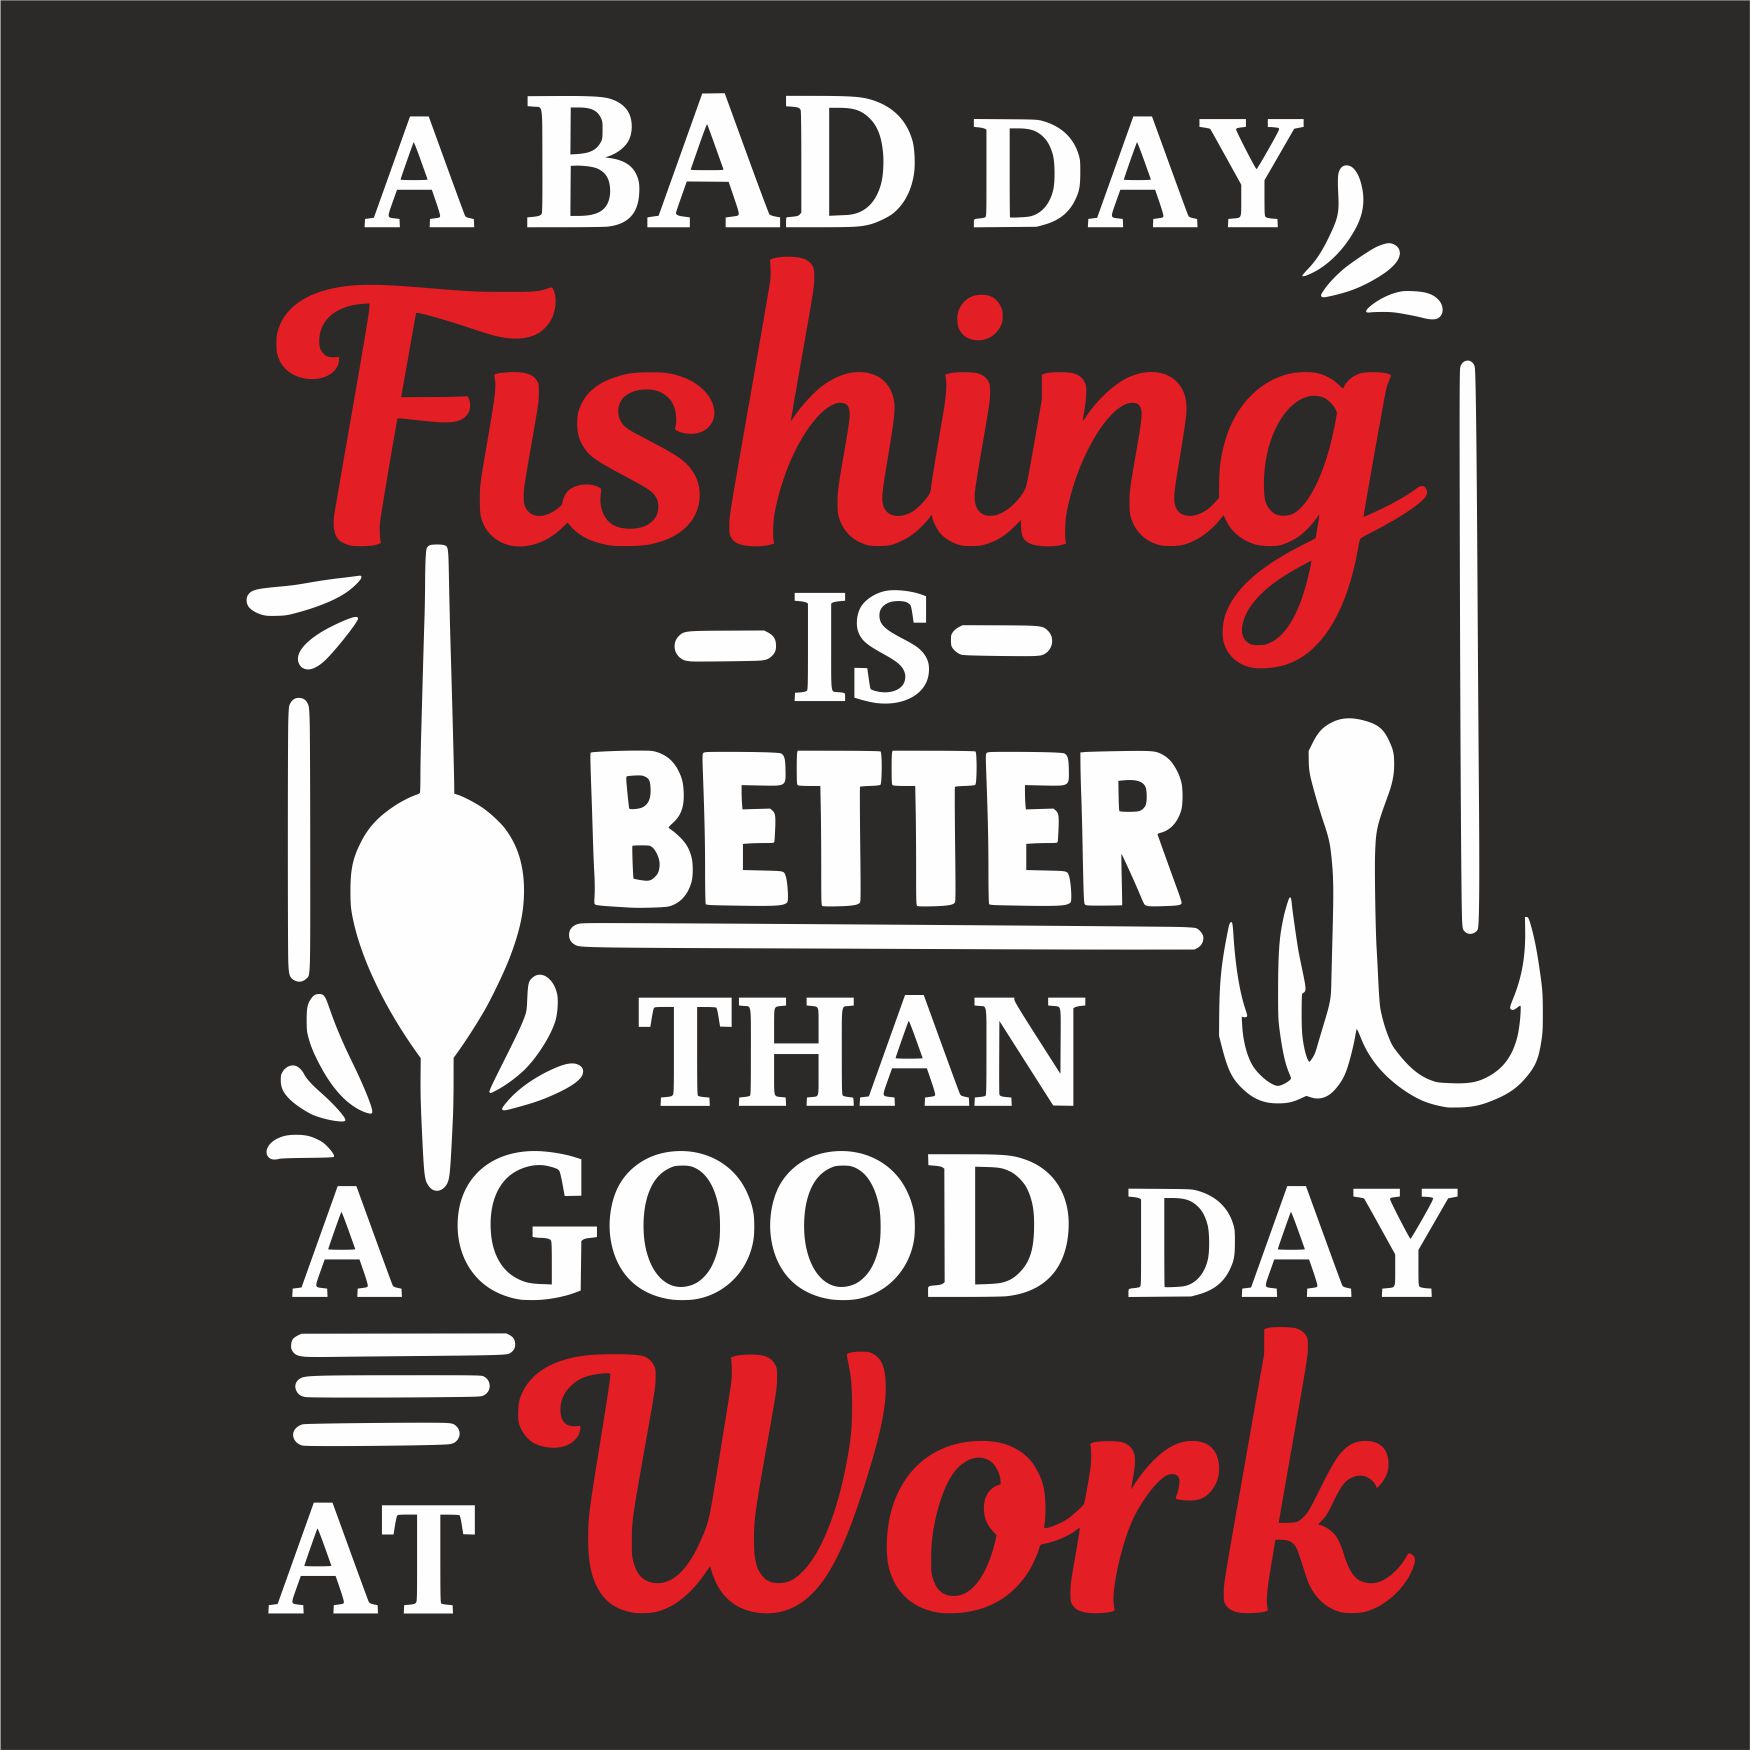 A BAD DAY FISHING IS BETTER THAN A GOOD DAY AT WORK T-SHIRT